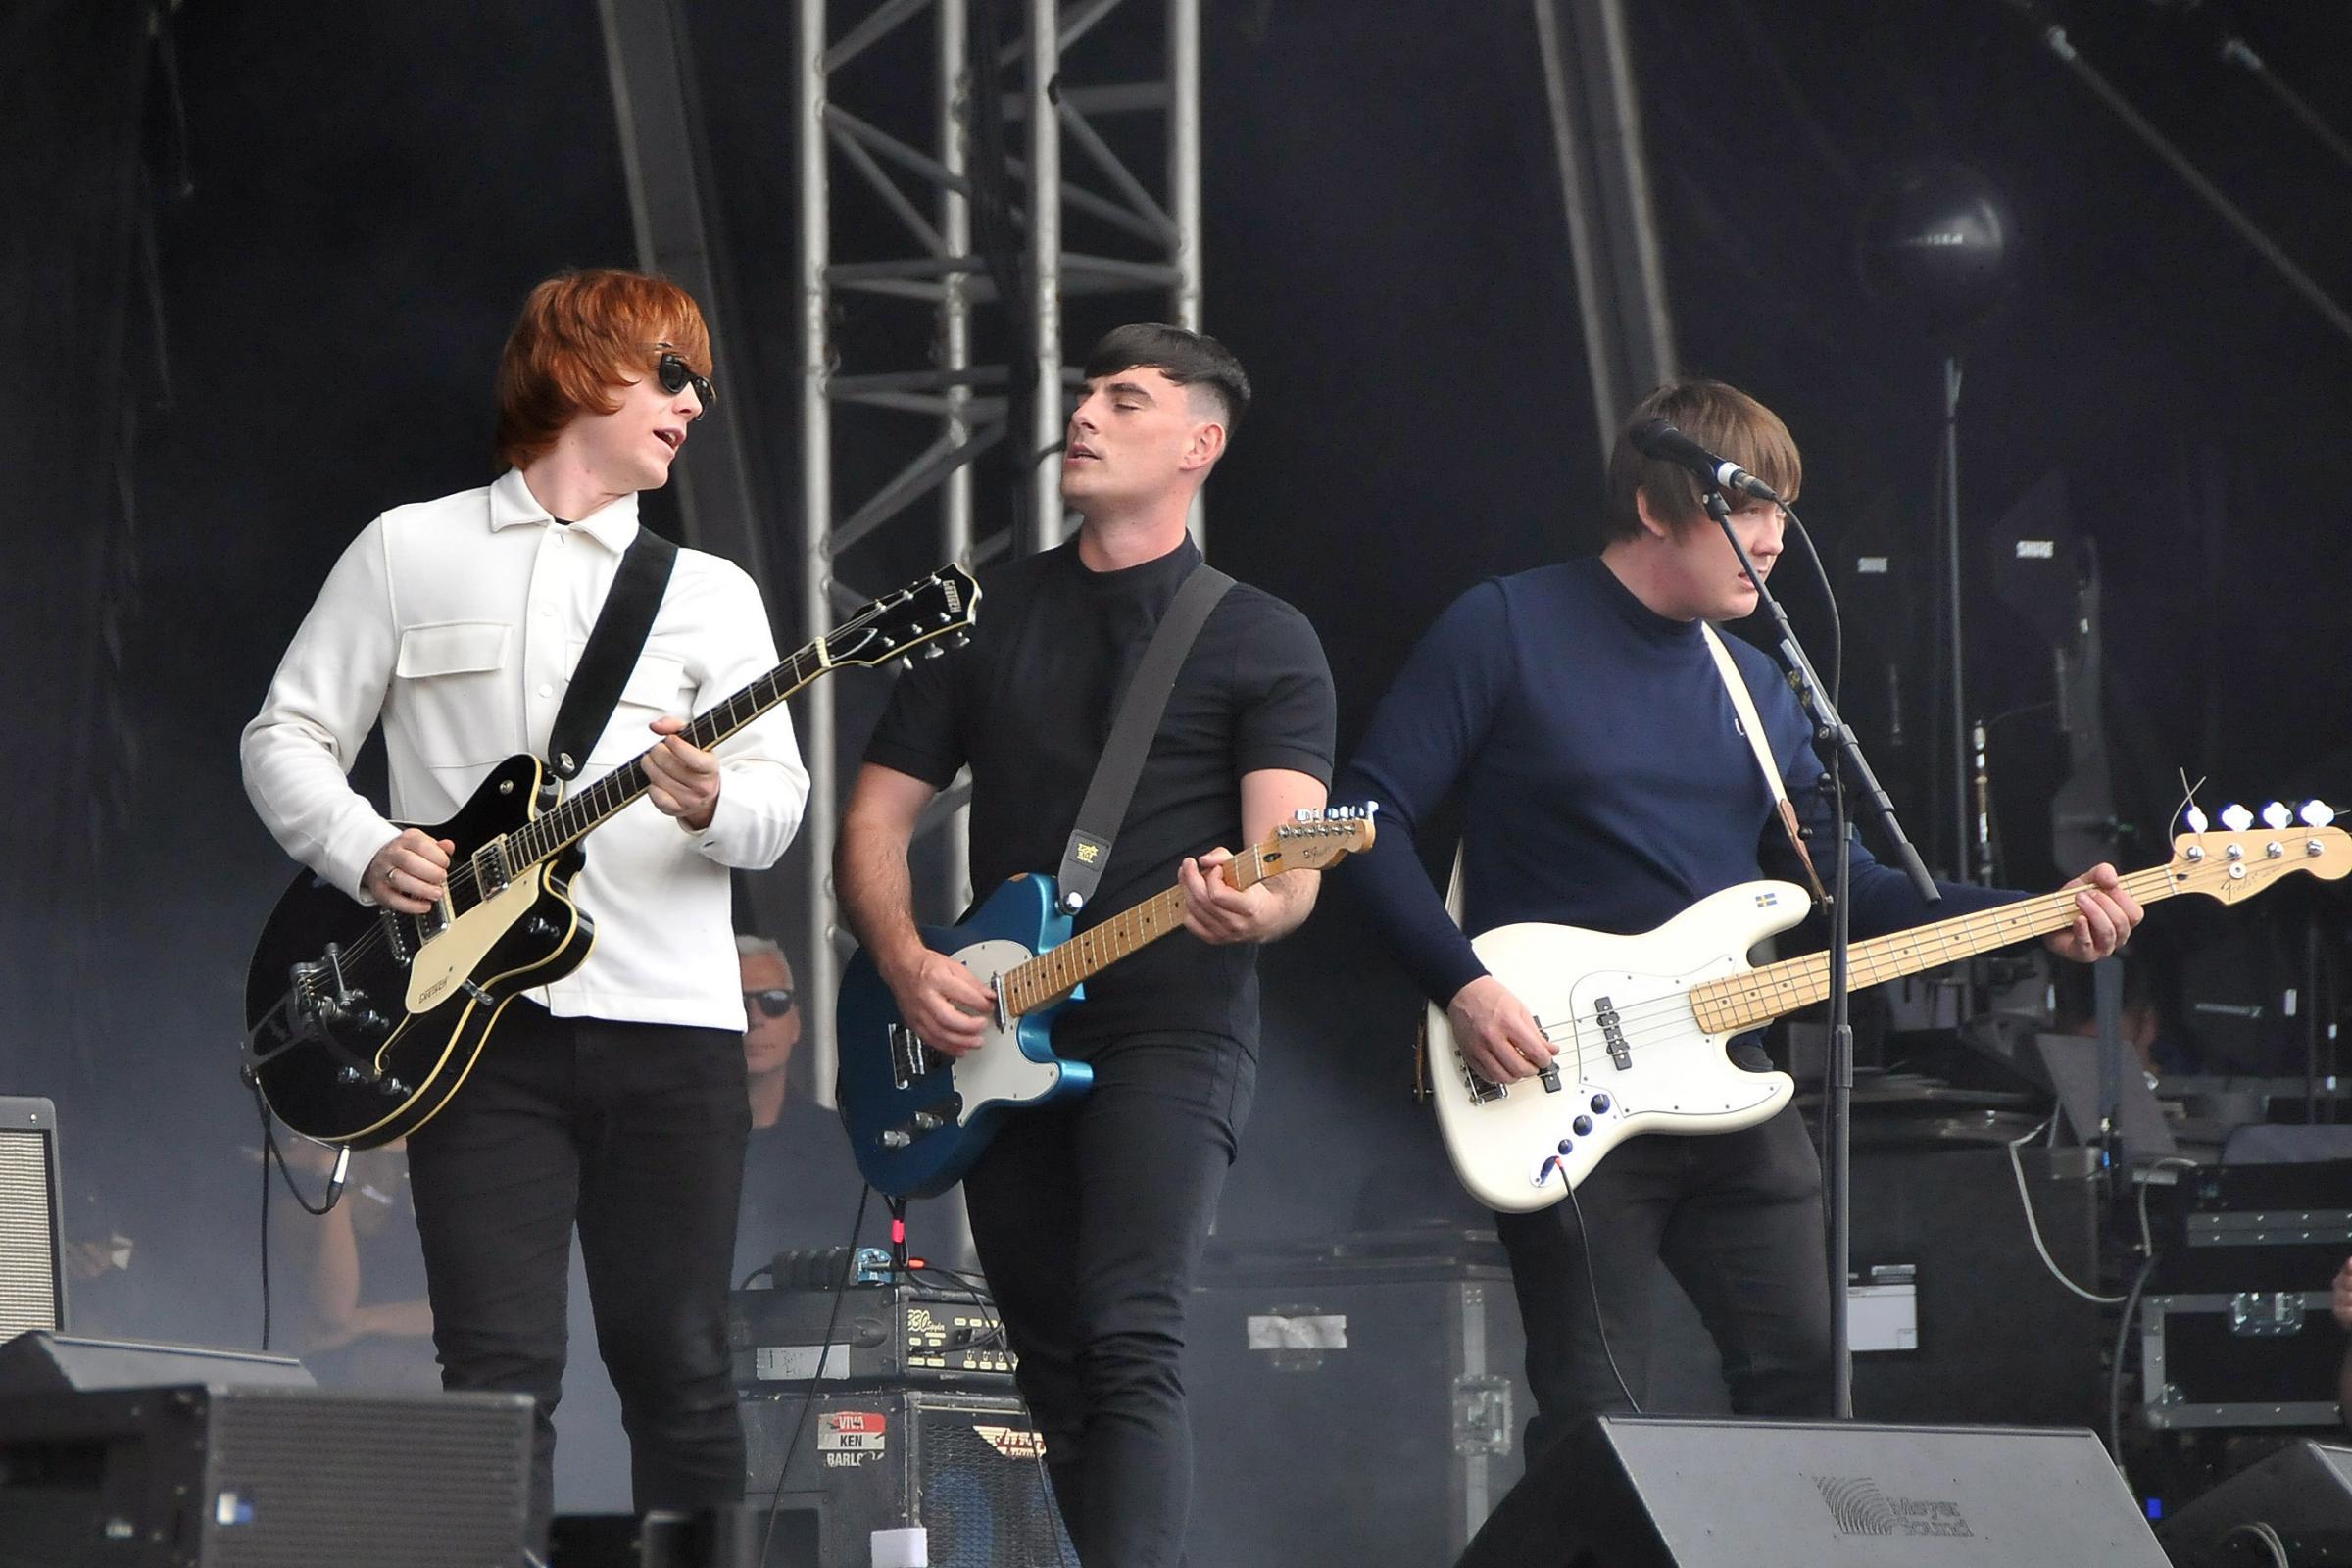 The Ks at Neighbourhood Weekender pictured by Dave Gillespie